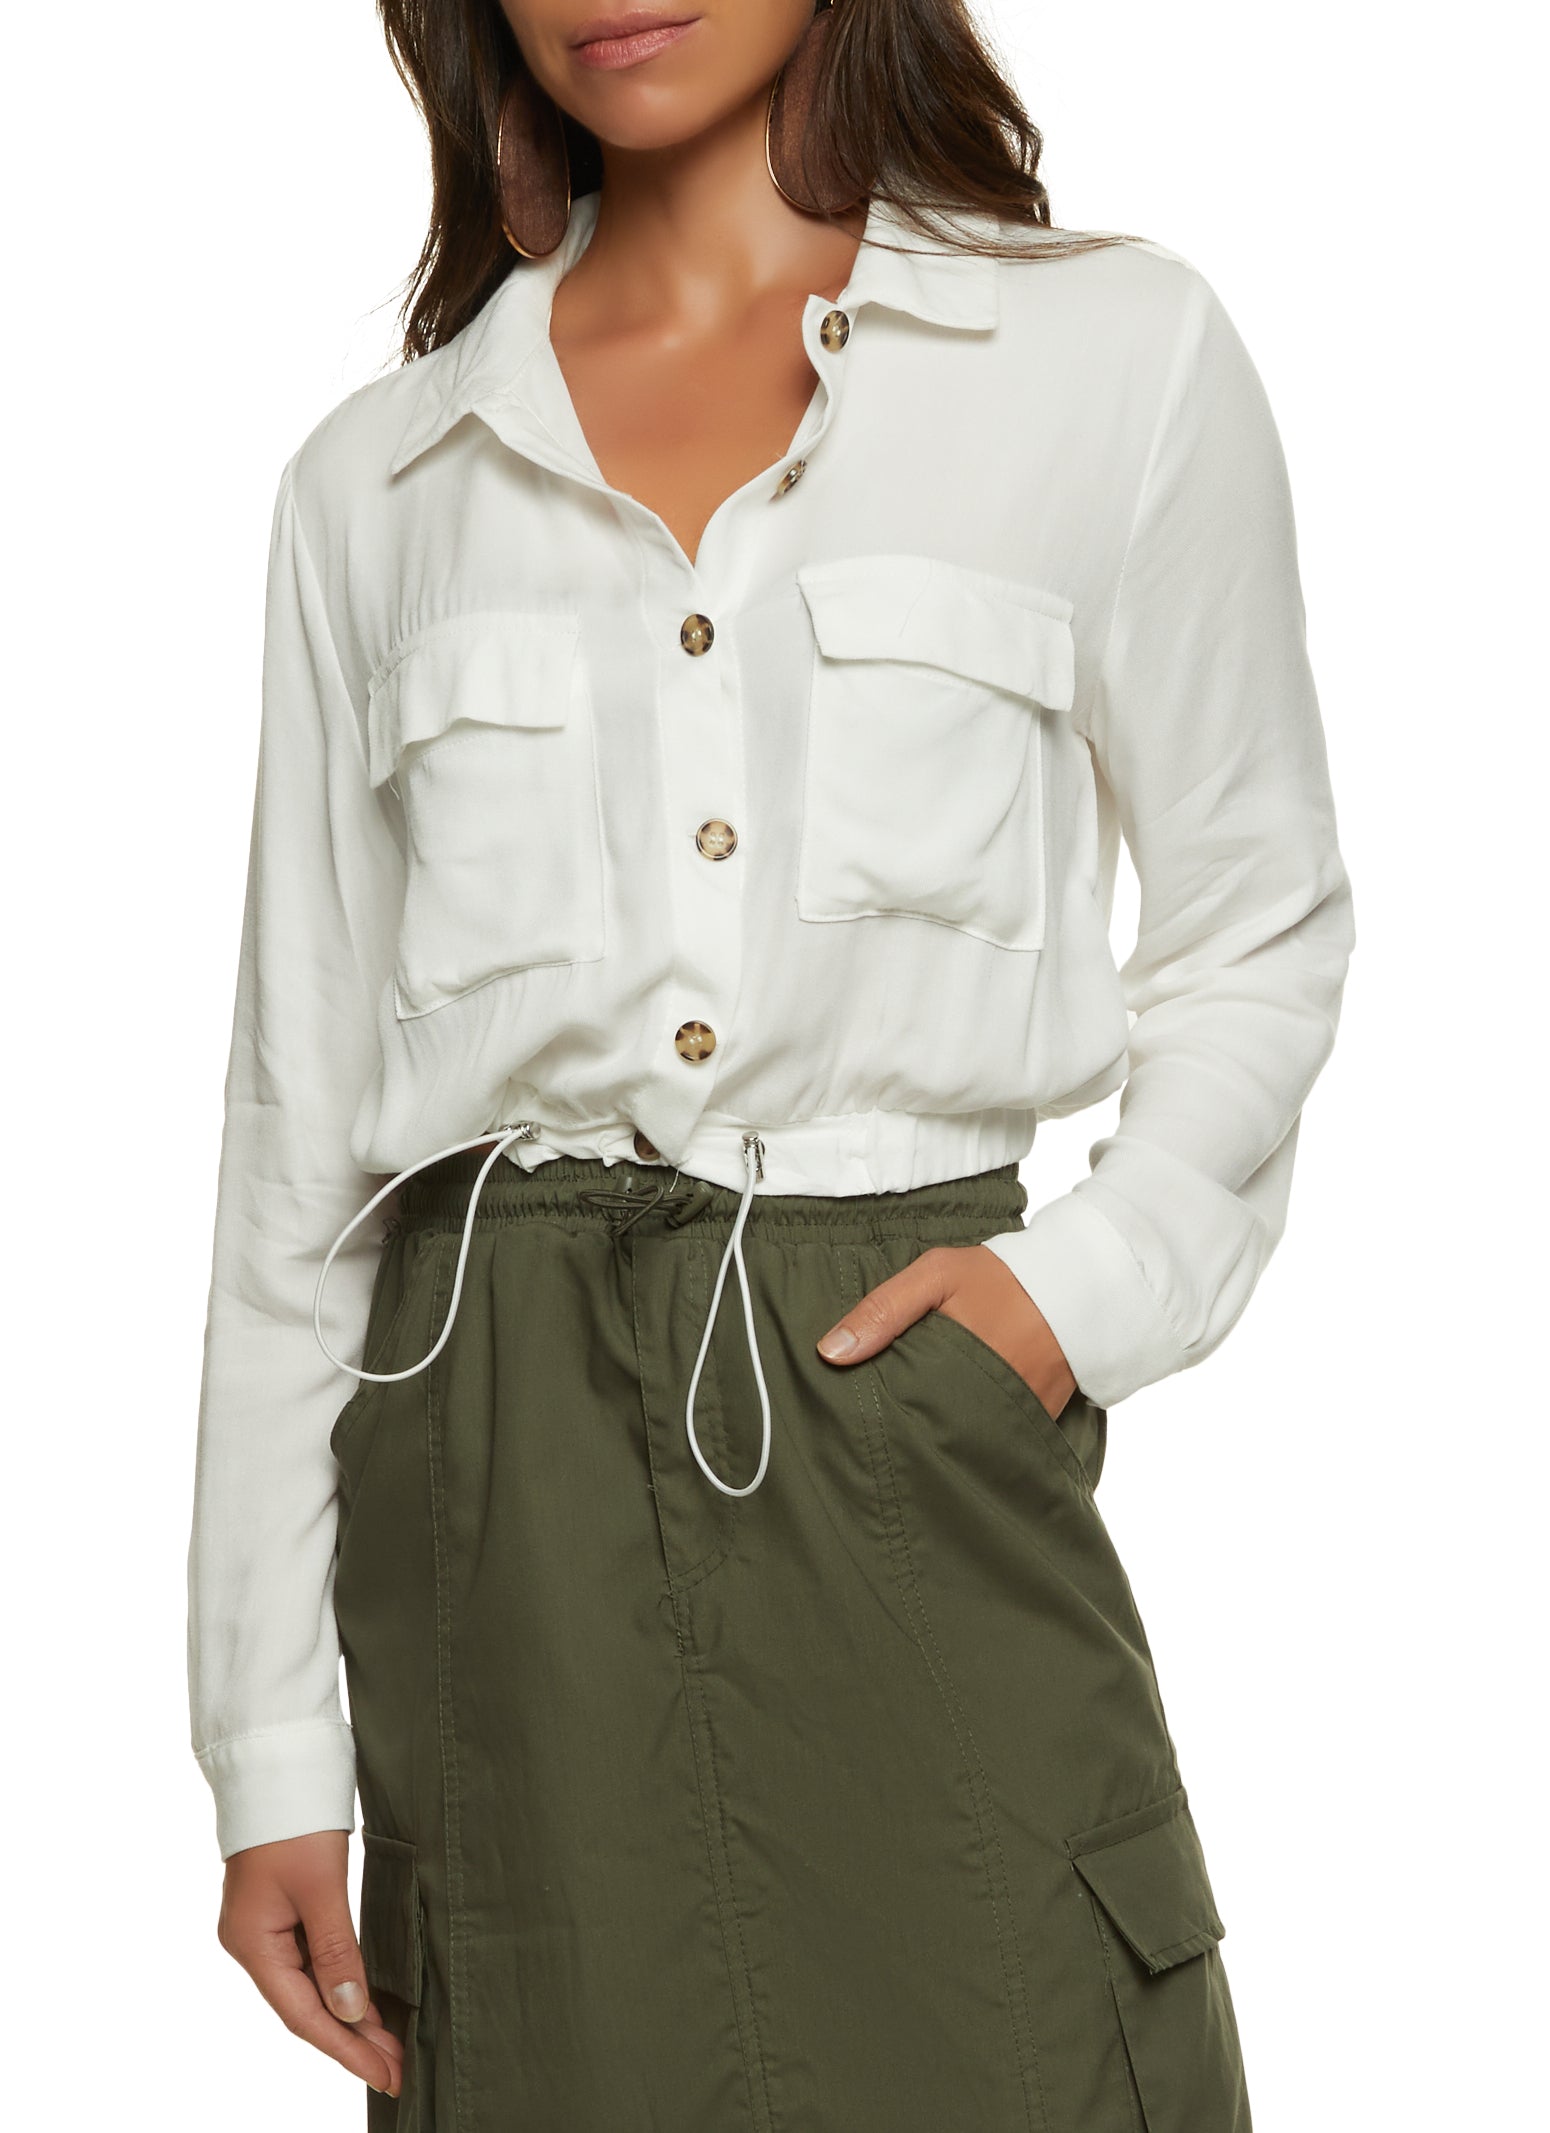 Blouse top with a drawstring in the hem in White